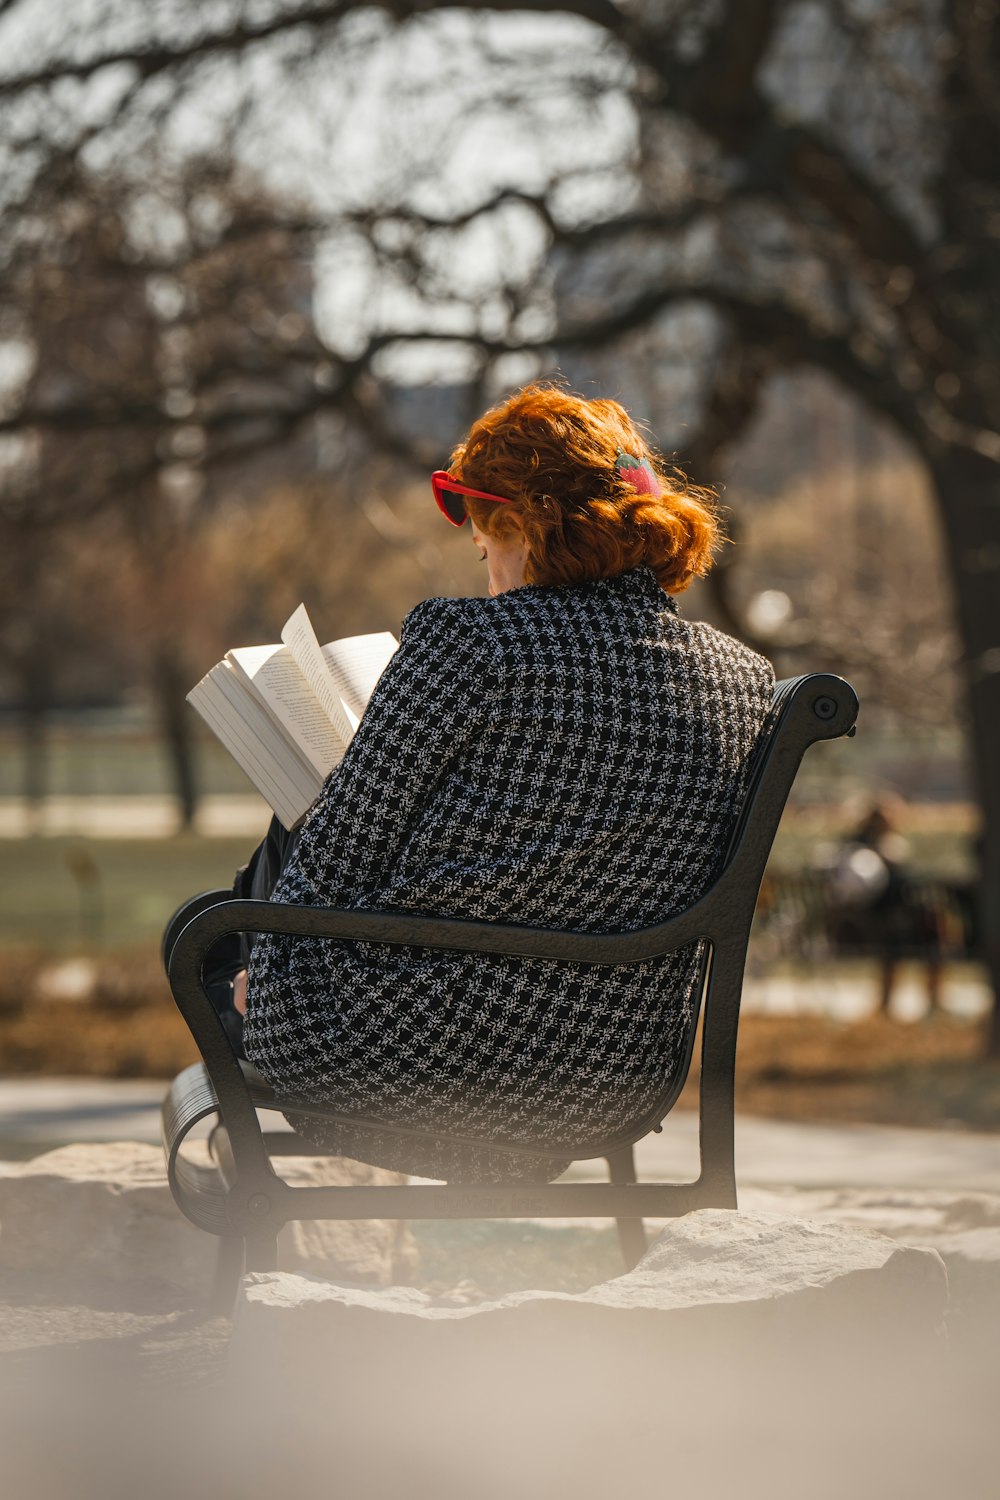 a woman sitting on a bench reading a book